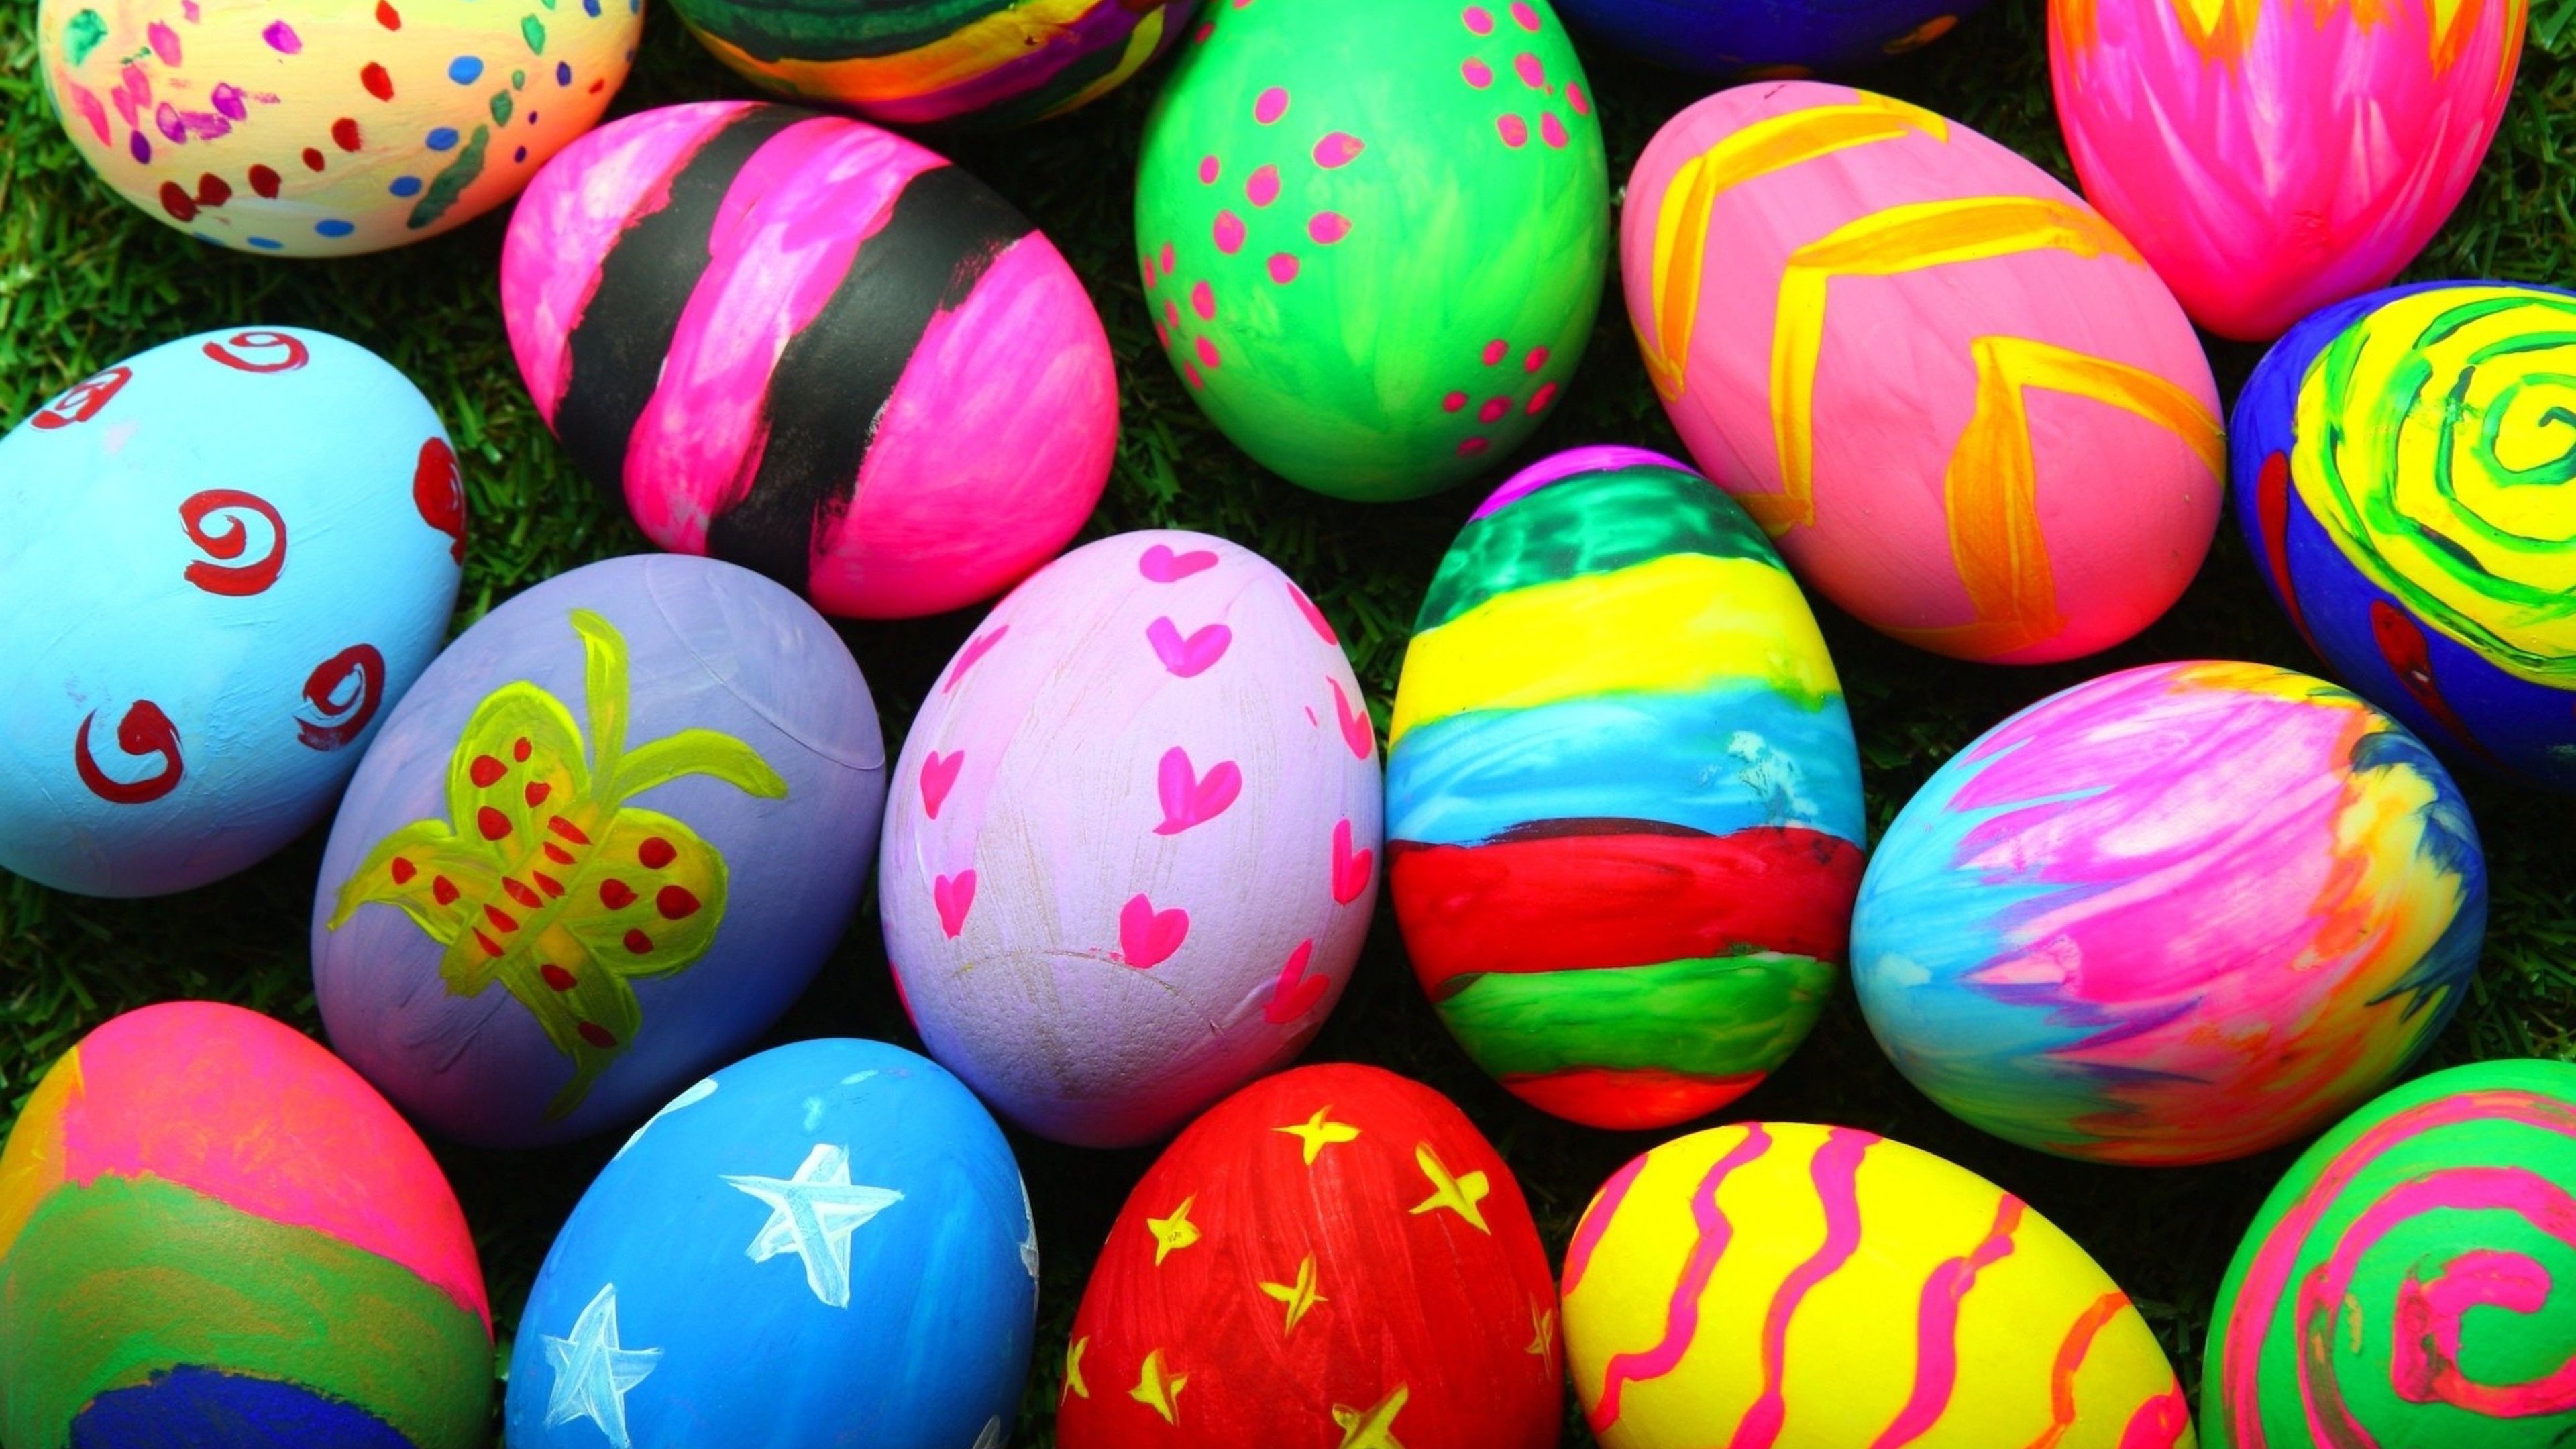 Colorful Easter Wallpaper Free Colorful Easter Background